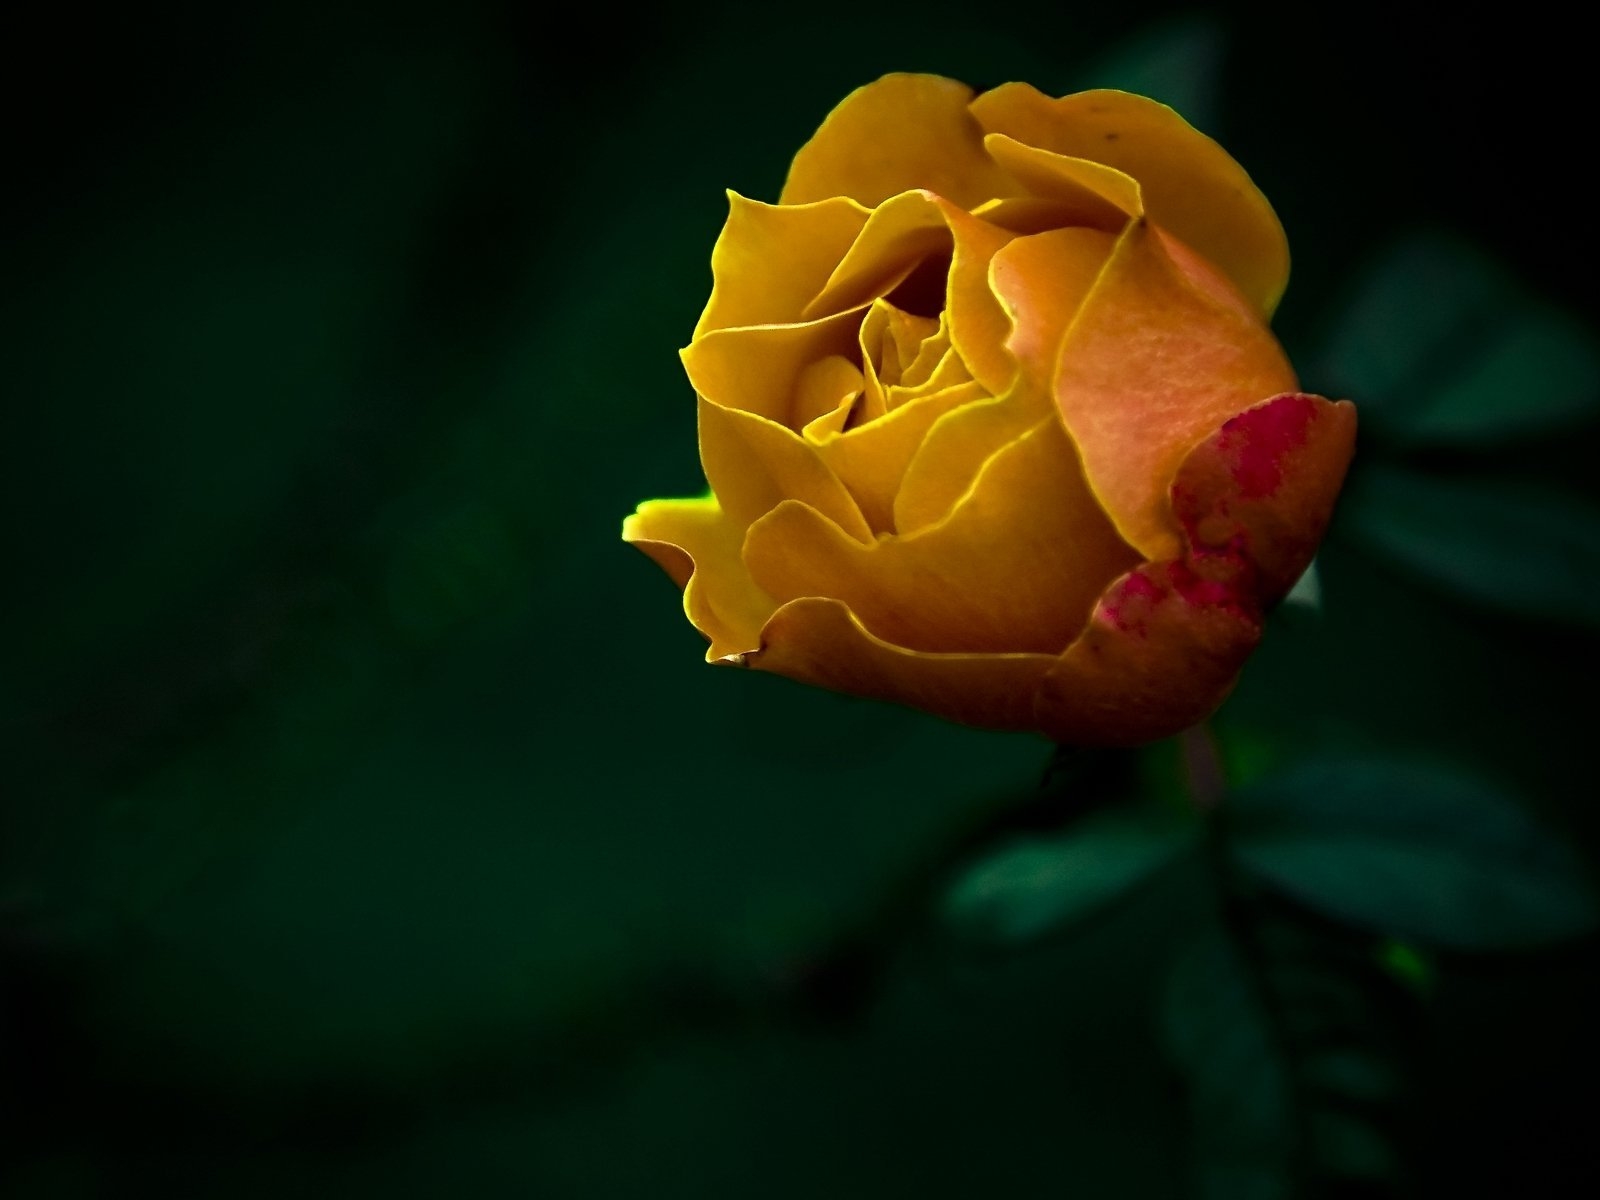 The last Rose for 1600 x 1200 resolution